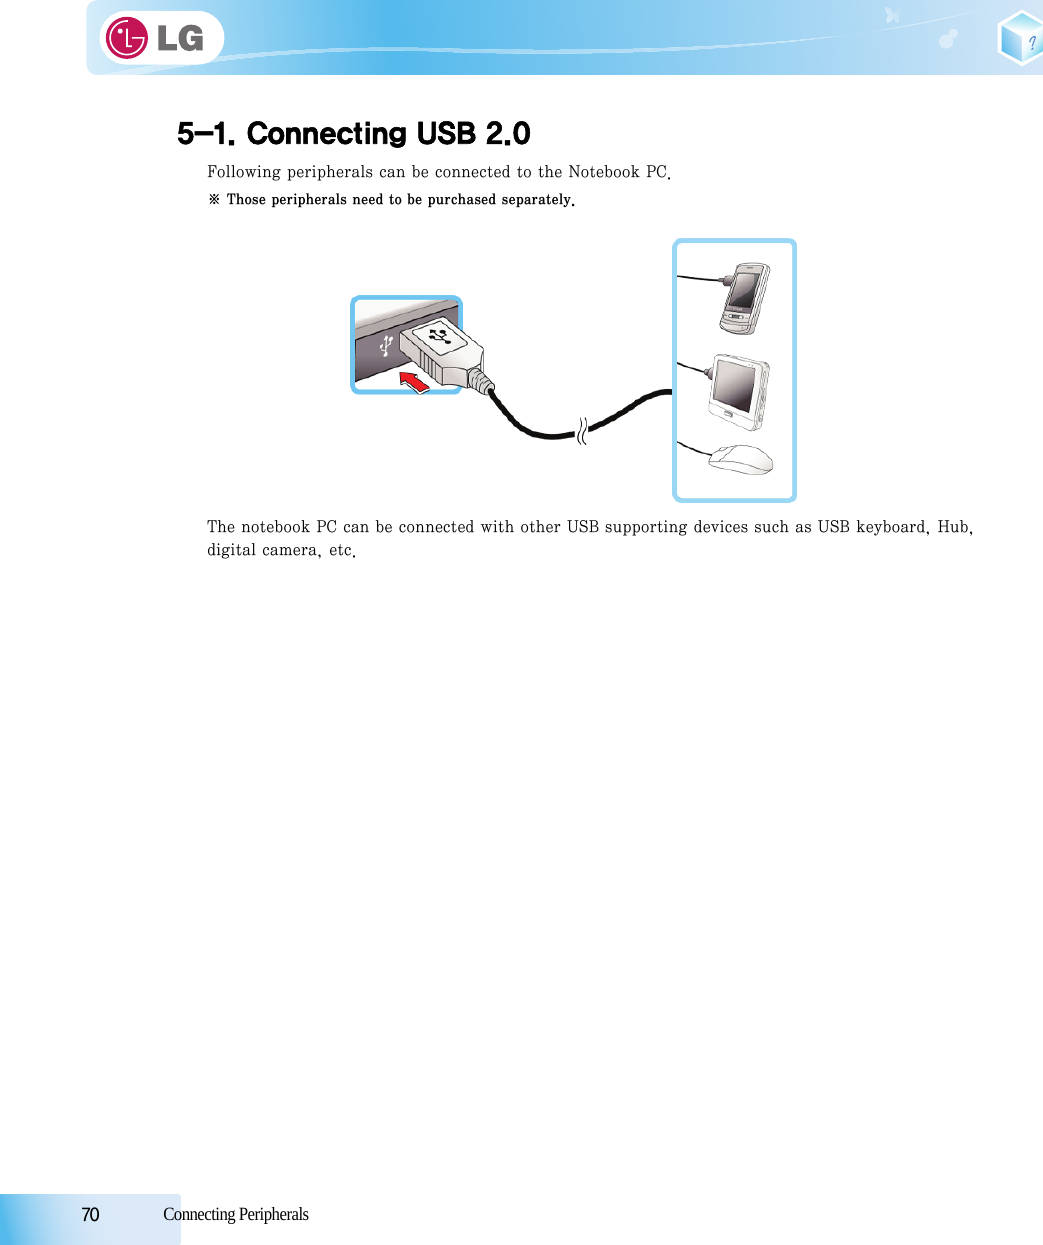 70            Connecting Peripherals5-1. Connecting USB 2.0Following peripherals can be connected to the Notebook PC. ※ Those peripherals need to be purchased separately.The notebook PC can be connected with other USB supporting devices such as USB keyboard, Hub,digital camera, etc. 